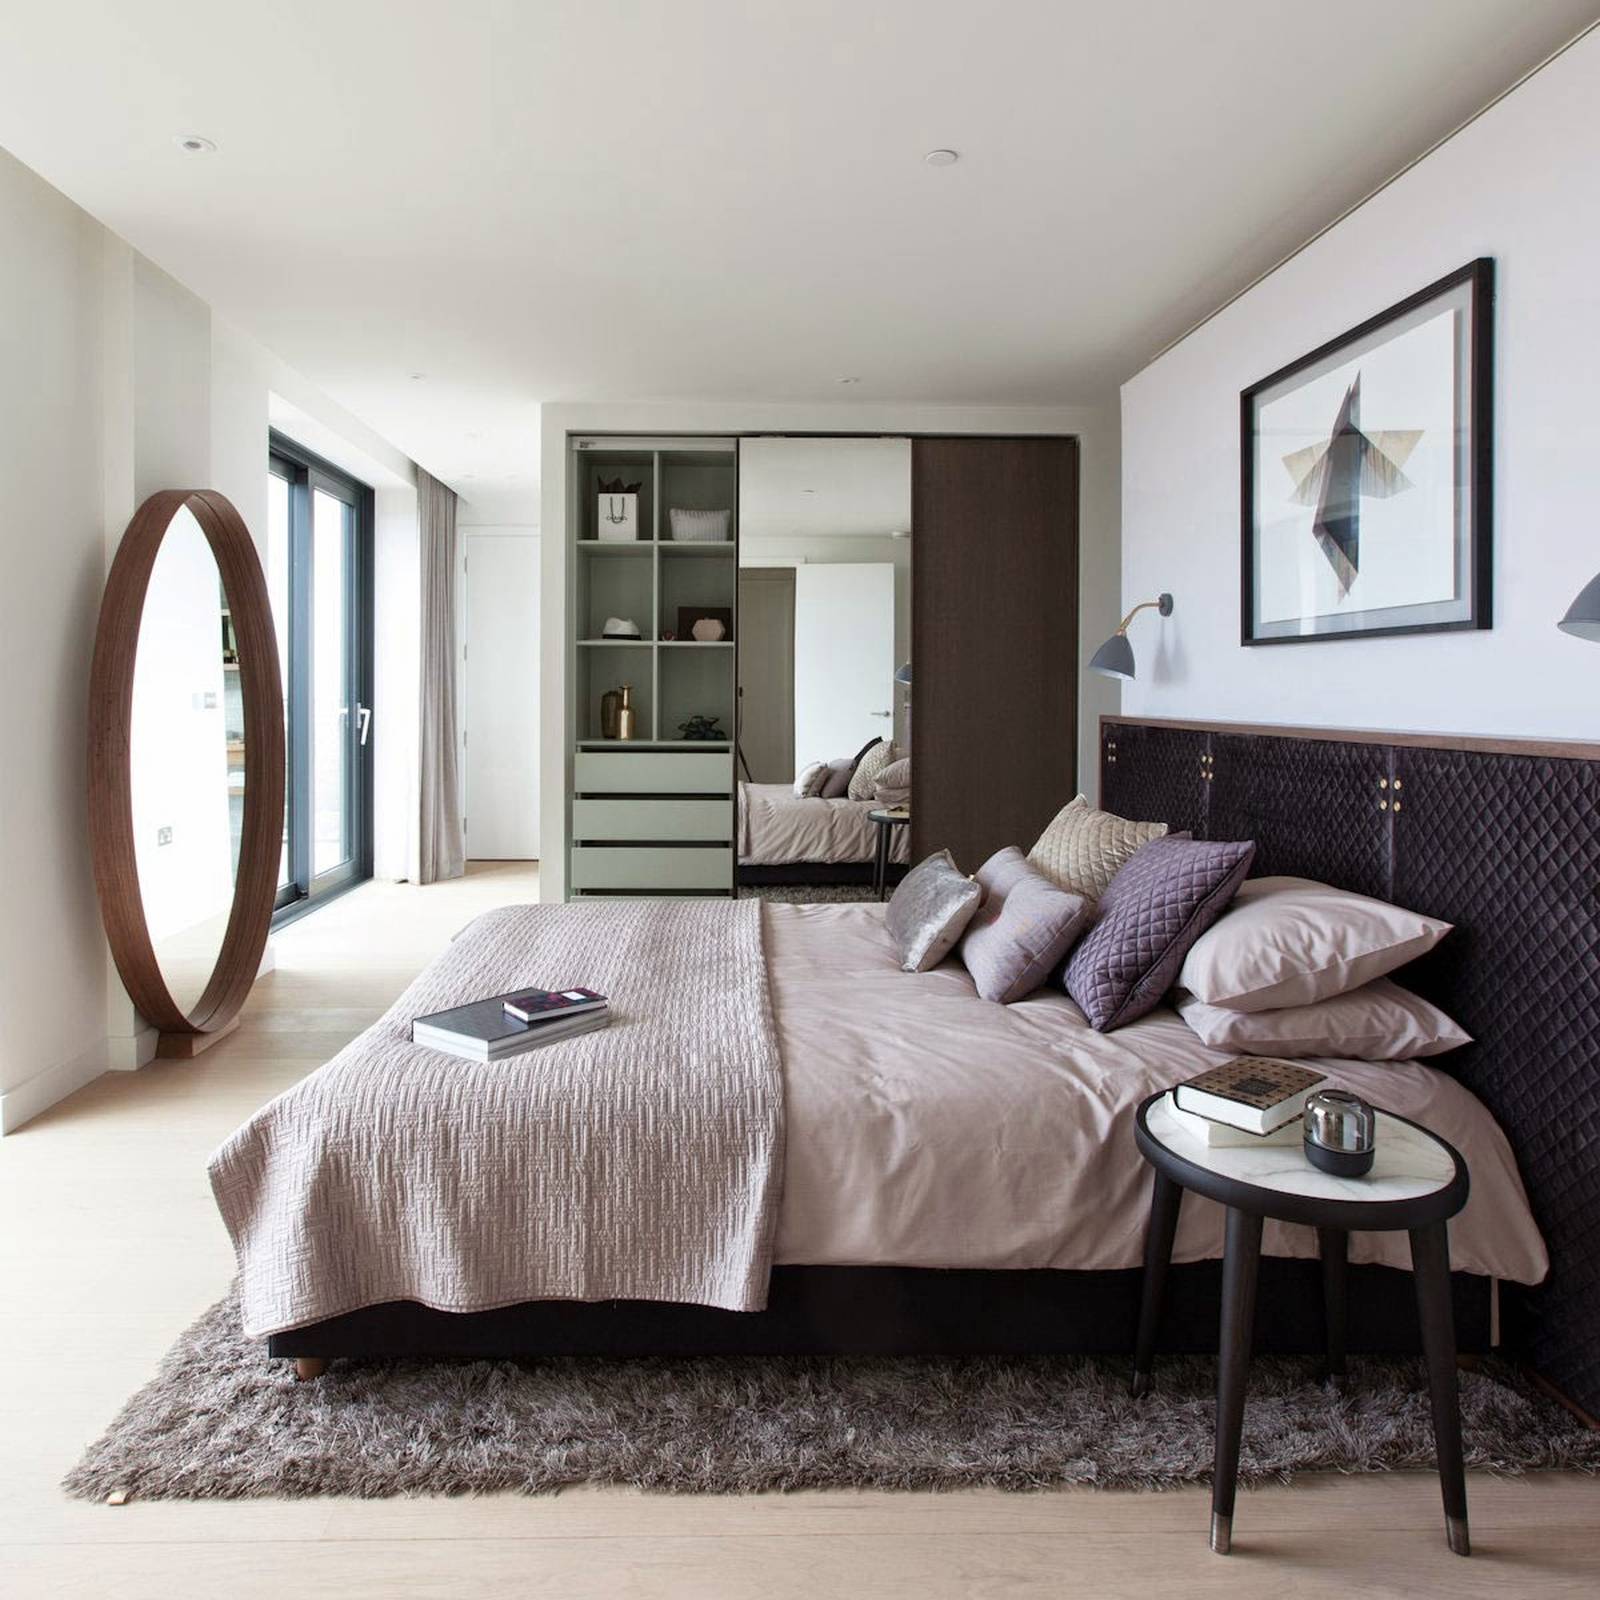 11 Tips For Quick Bedroom Makeover